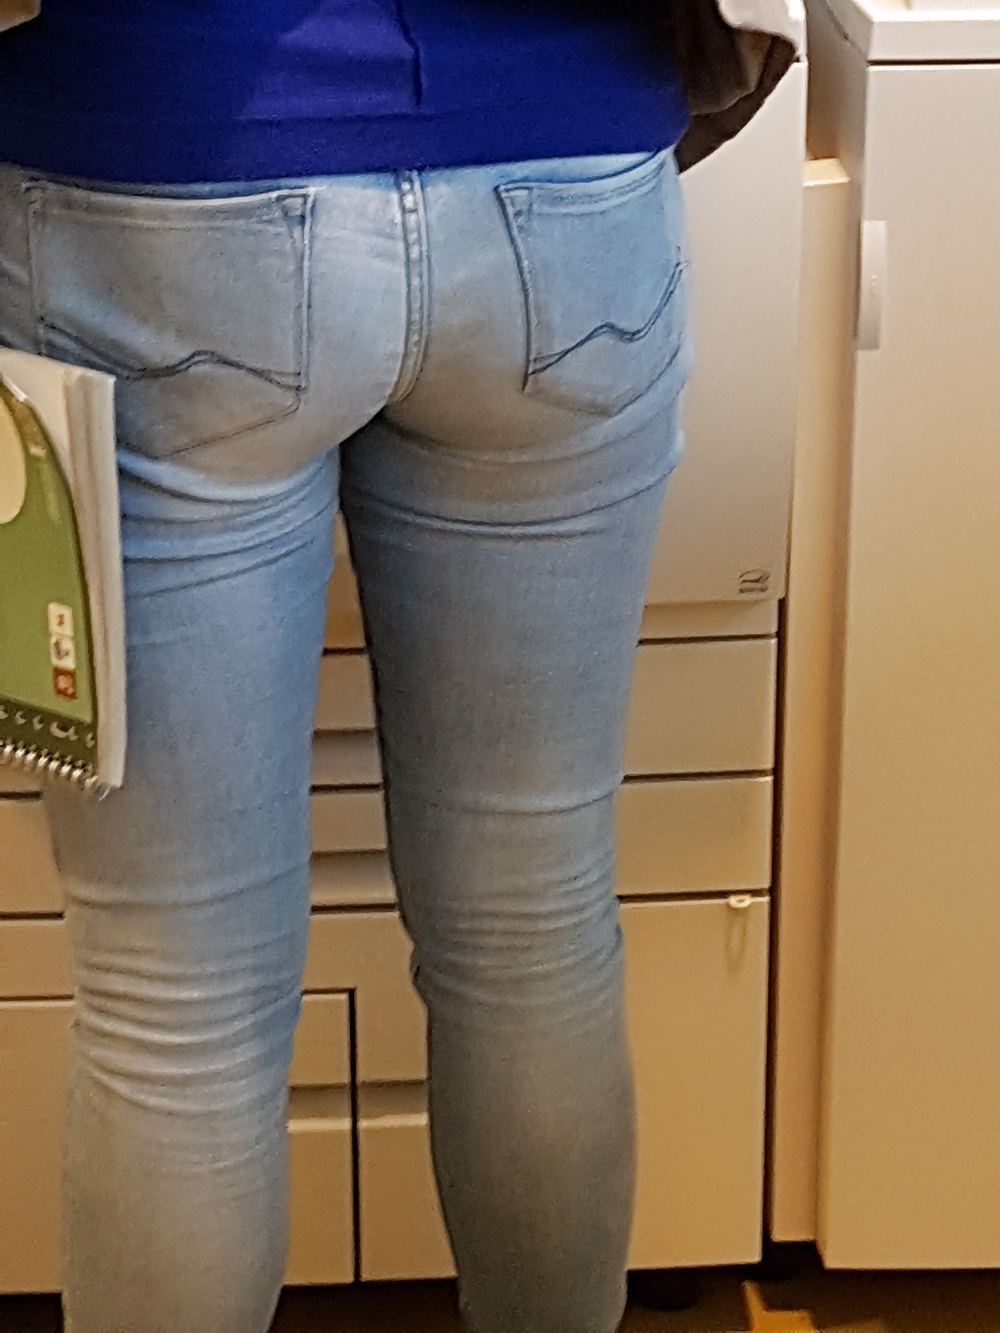 Hot blonde with tight ass in blue jeans part 1 (16/17)